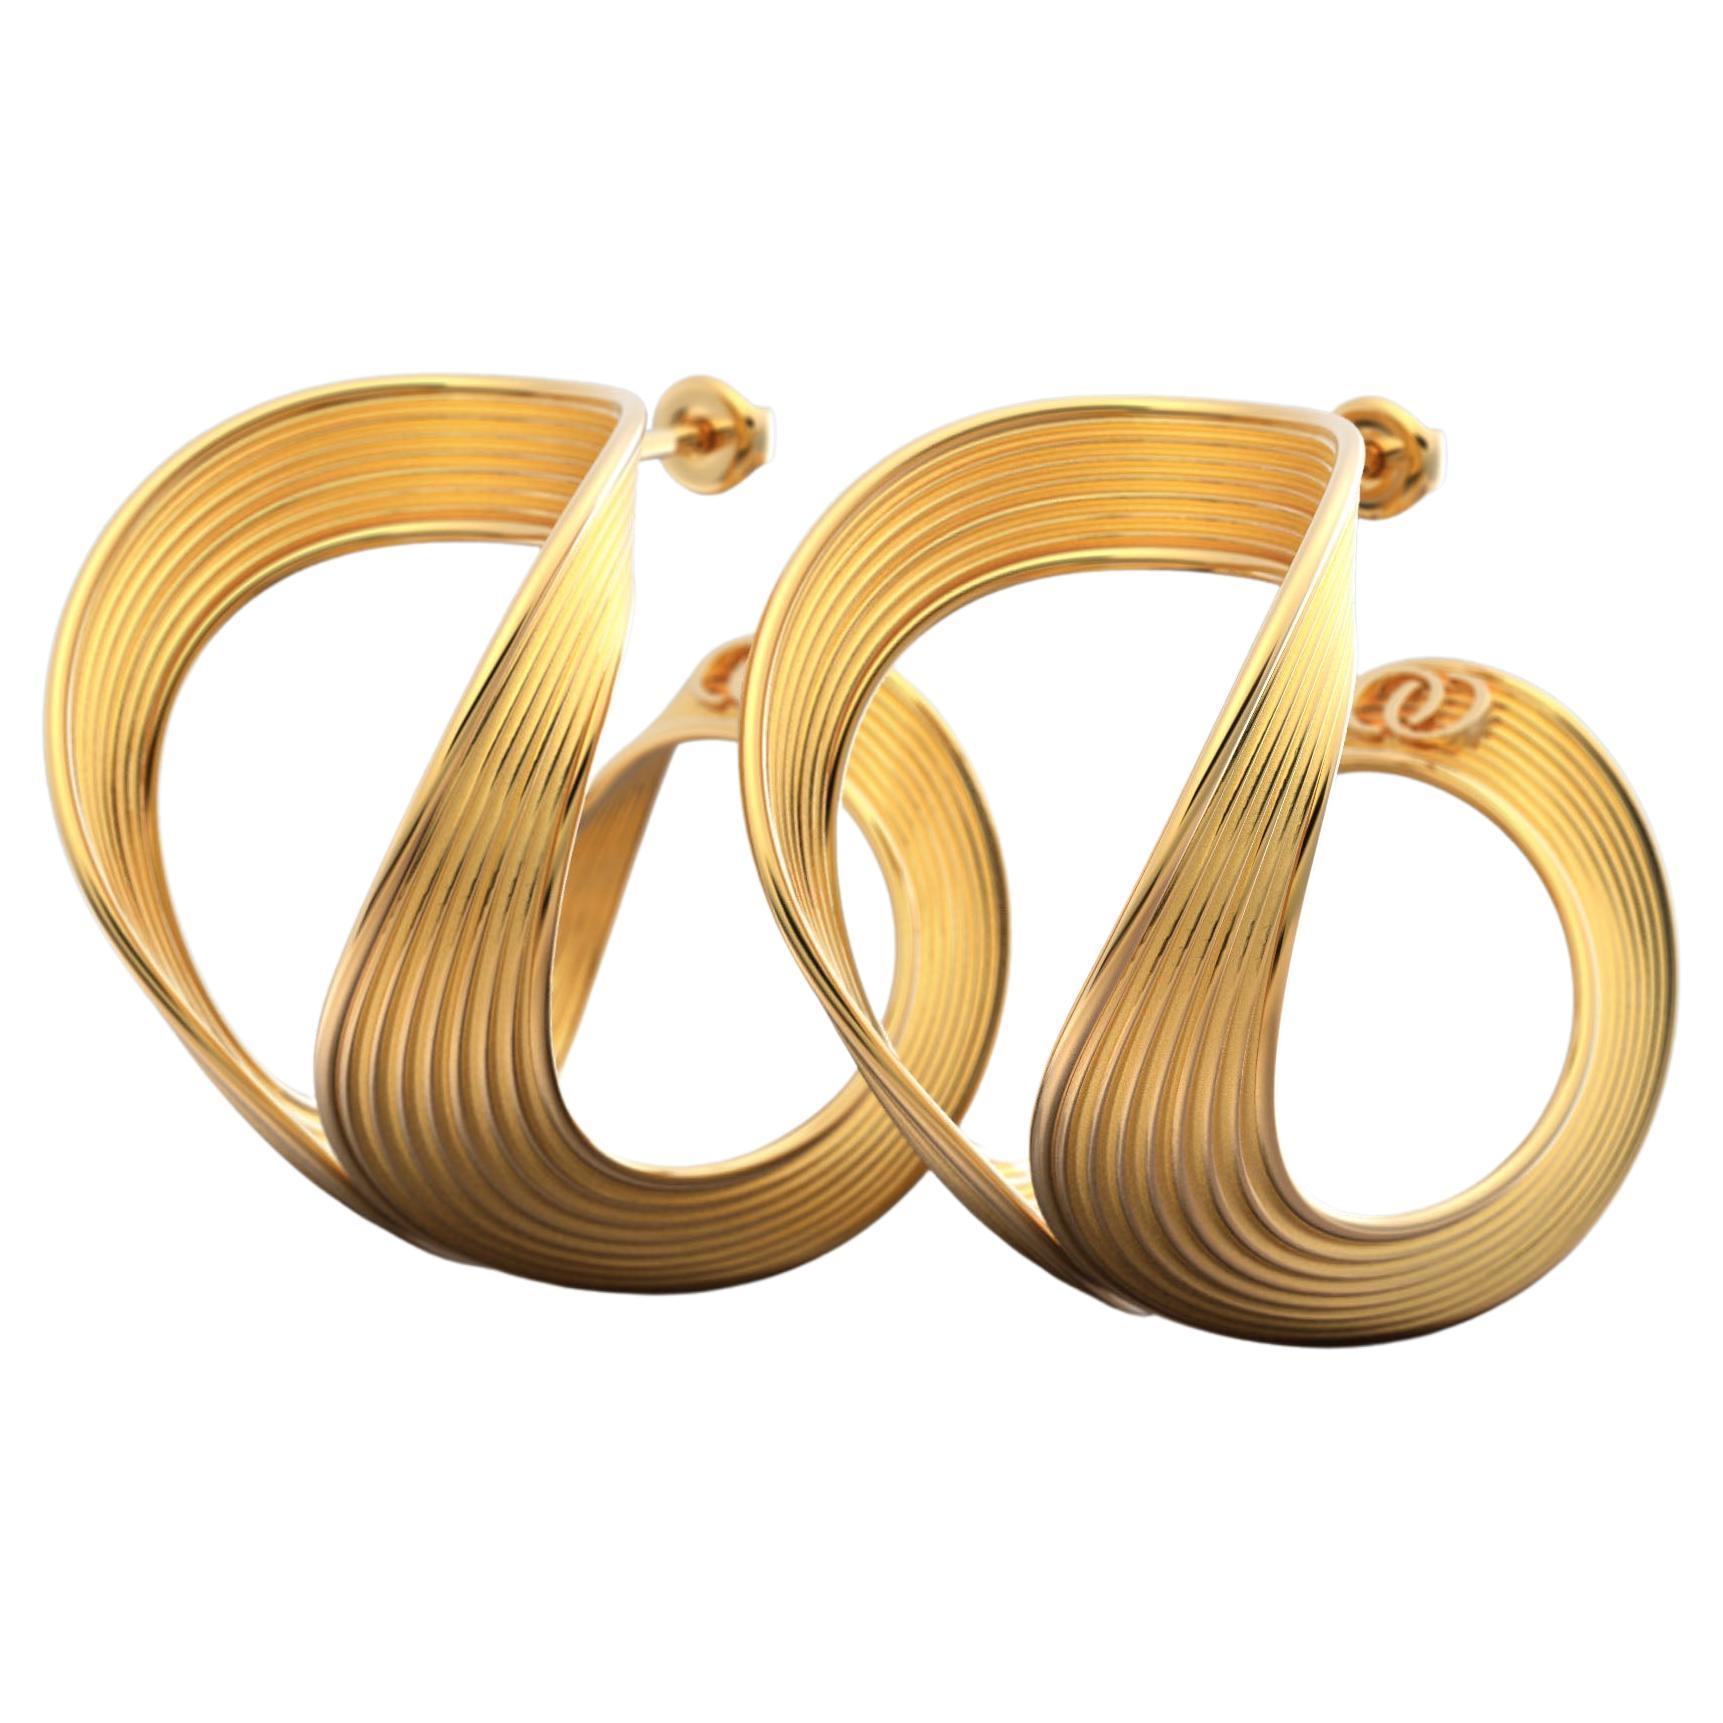 Gold Hoop Earrings, 14 karat large hoops made in Italy by Oltremare Gioielli